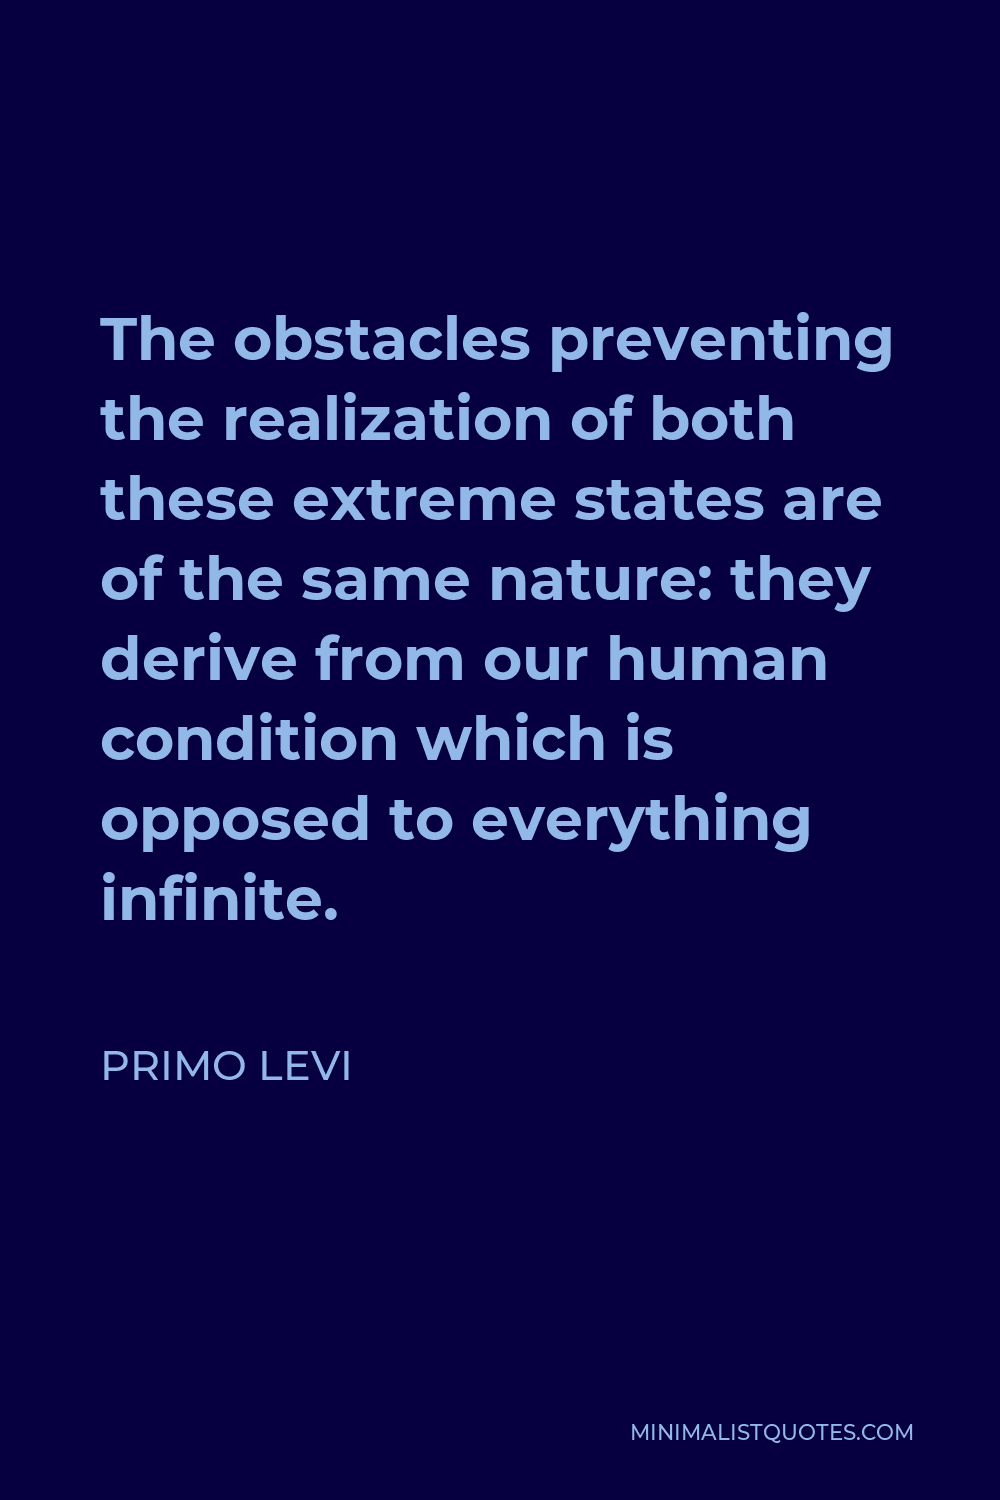 Primo Levi Quote - The obstacles preventing the realization of both these extreme states are of the same nature: they derive from our human condition which is opposed to everything infinite.